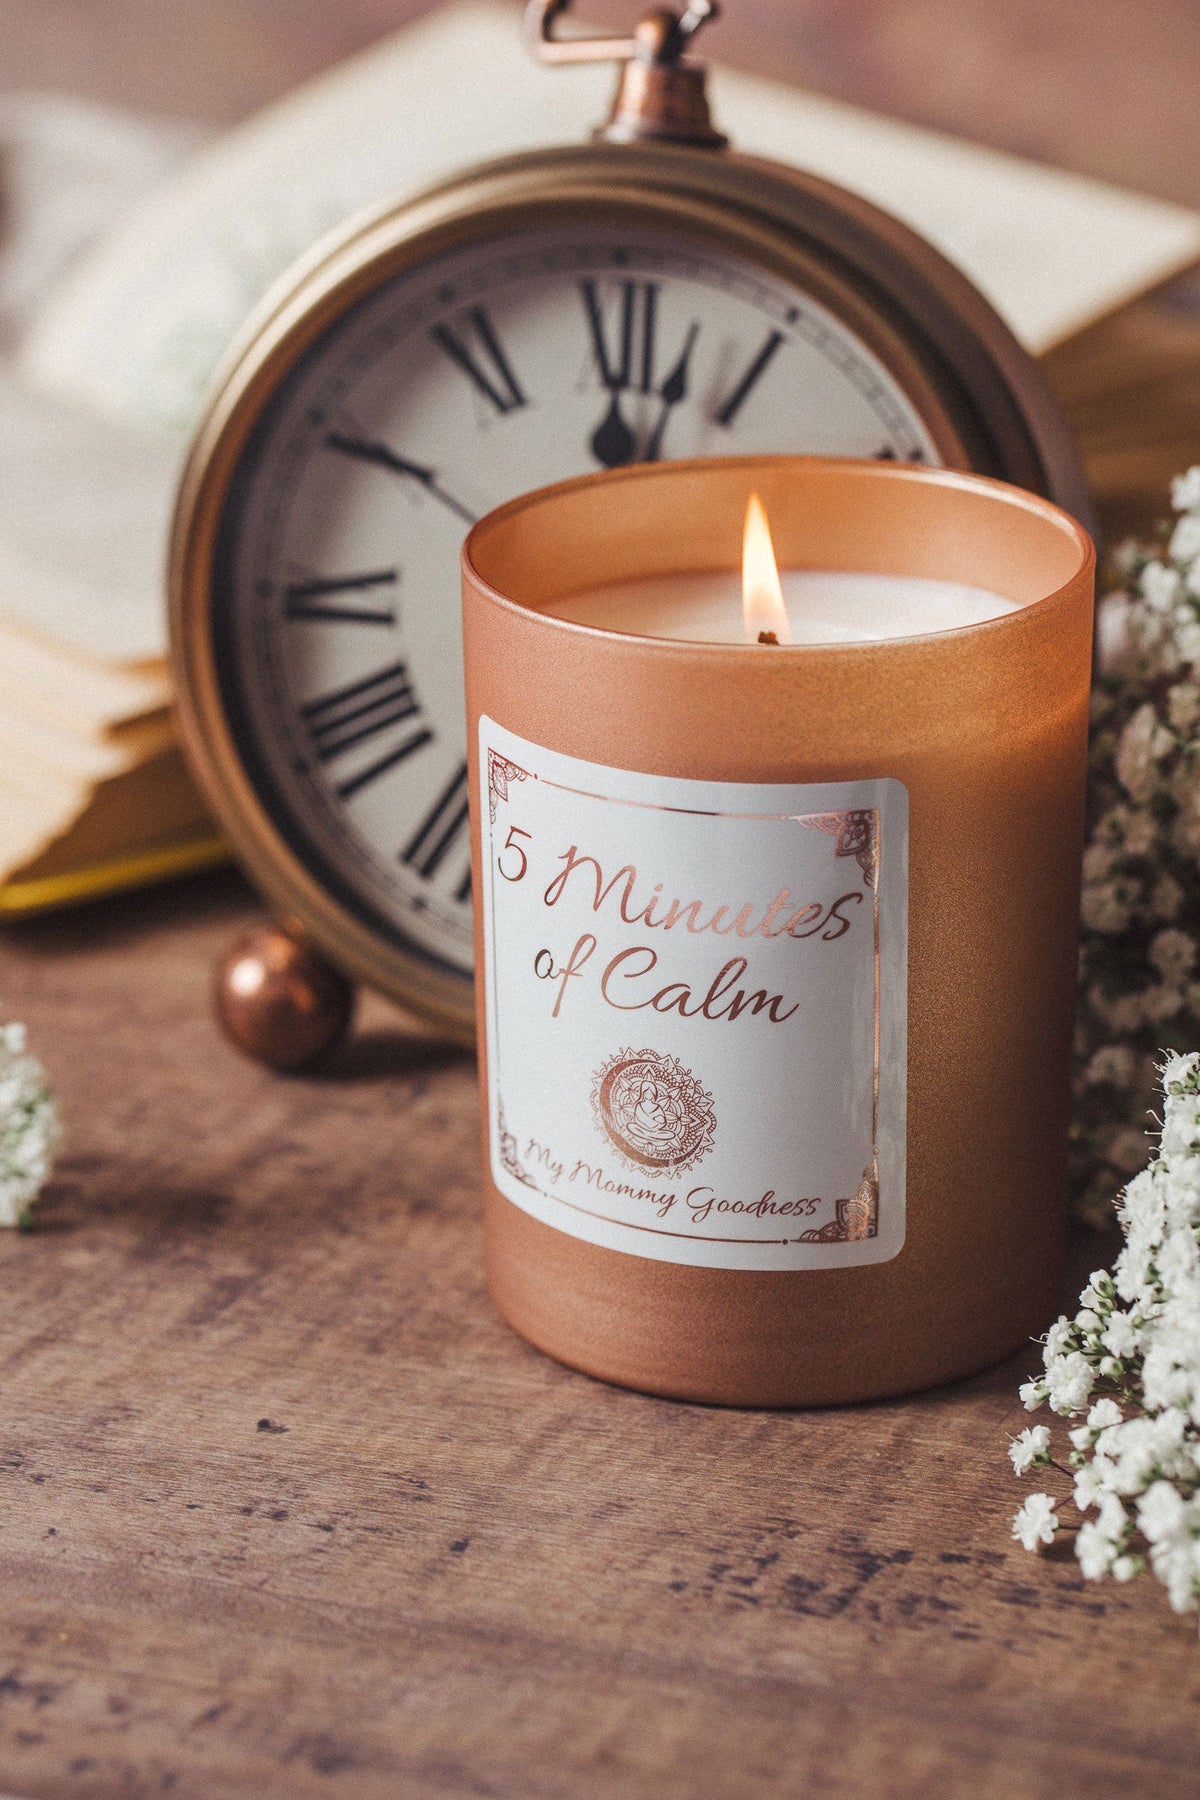 5 Minutes of Calm Candle - My Mommy Goodness